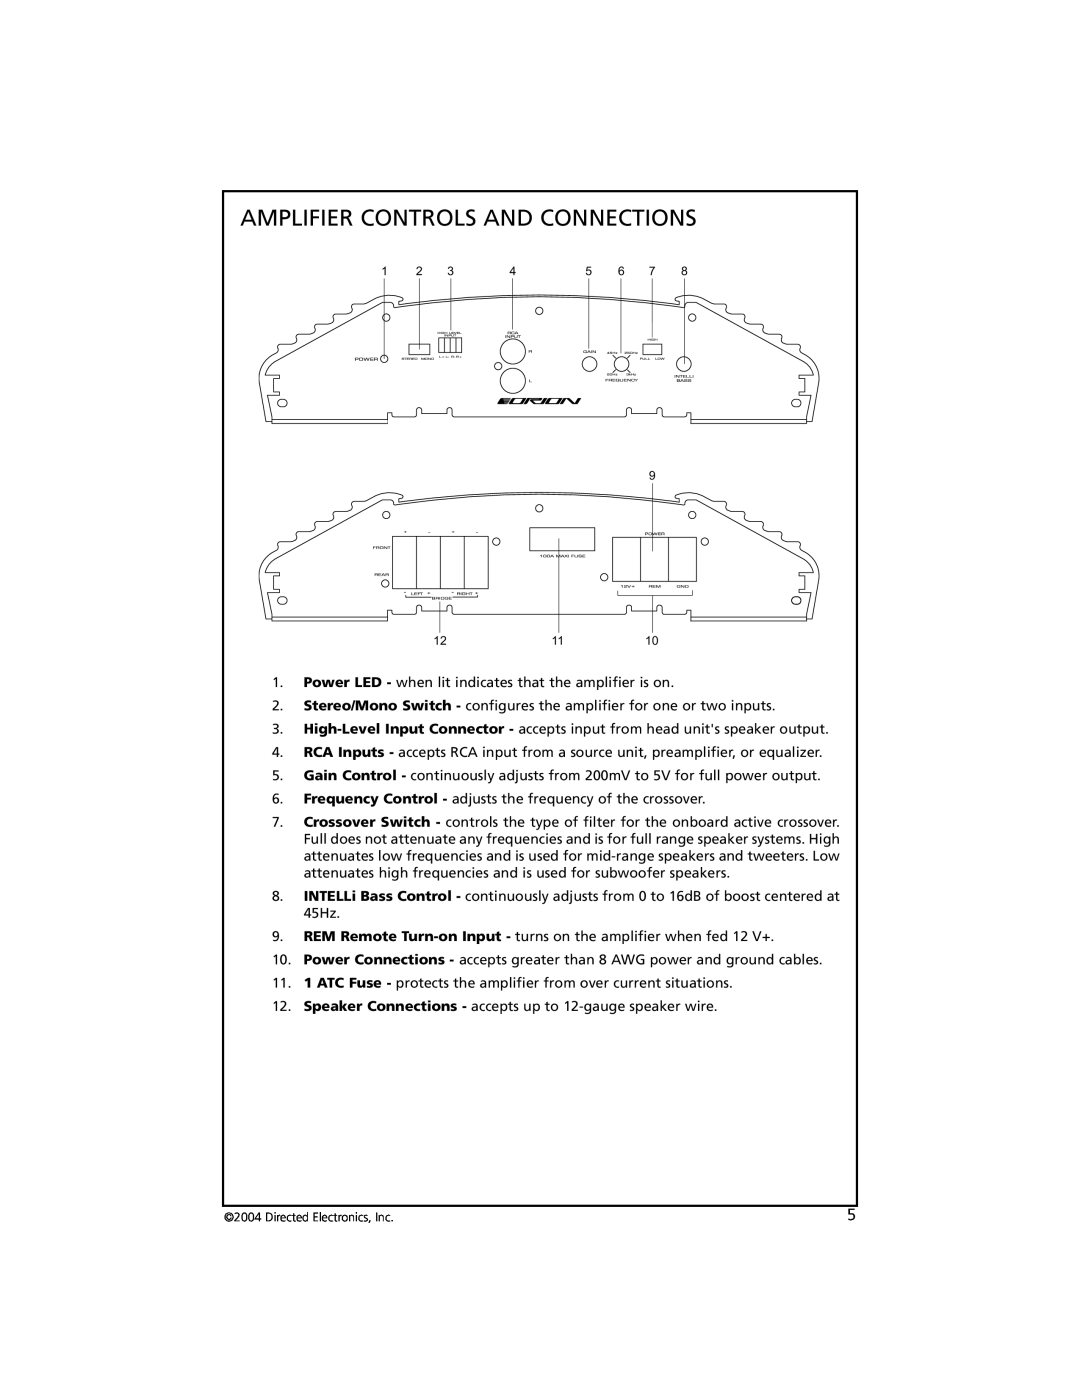 Orion 3002 manual Amplifier Controls And Connections 